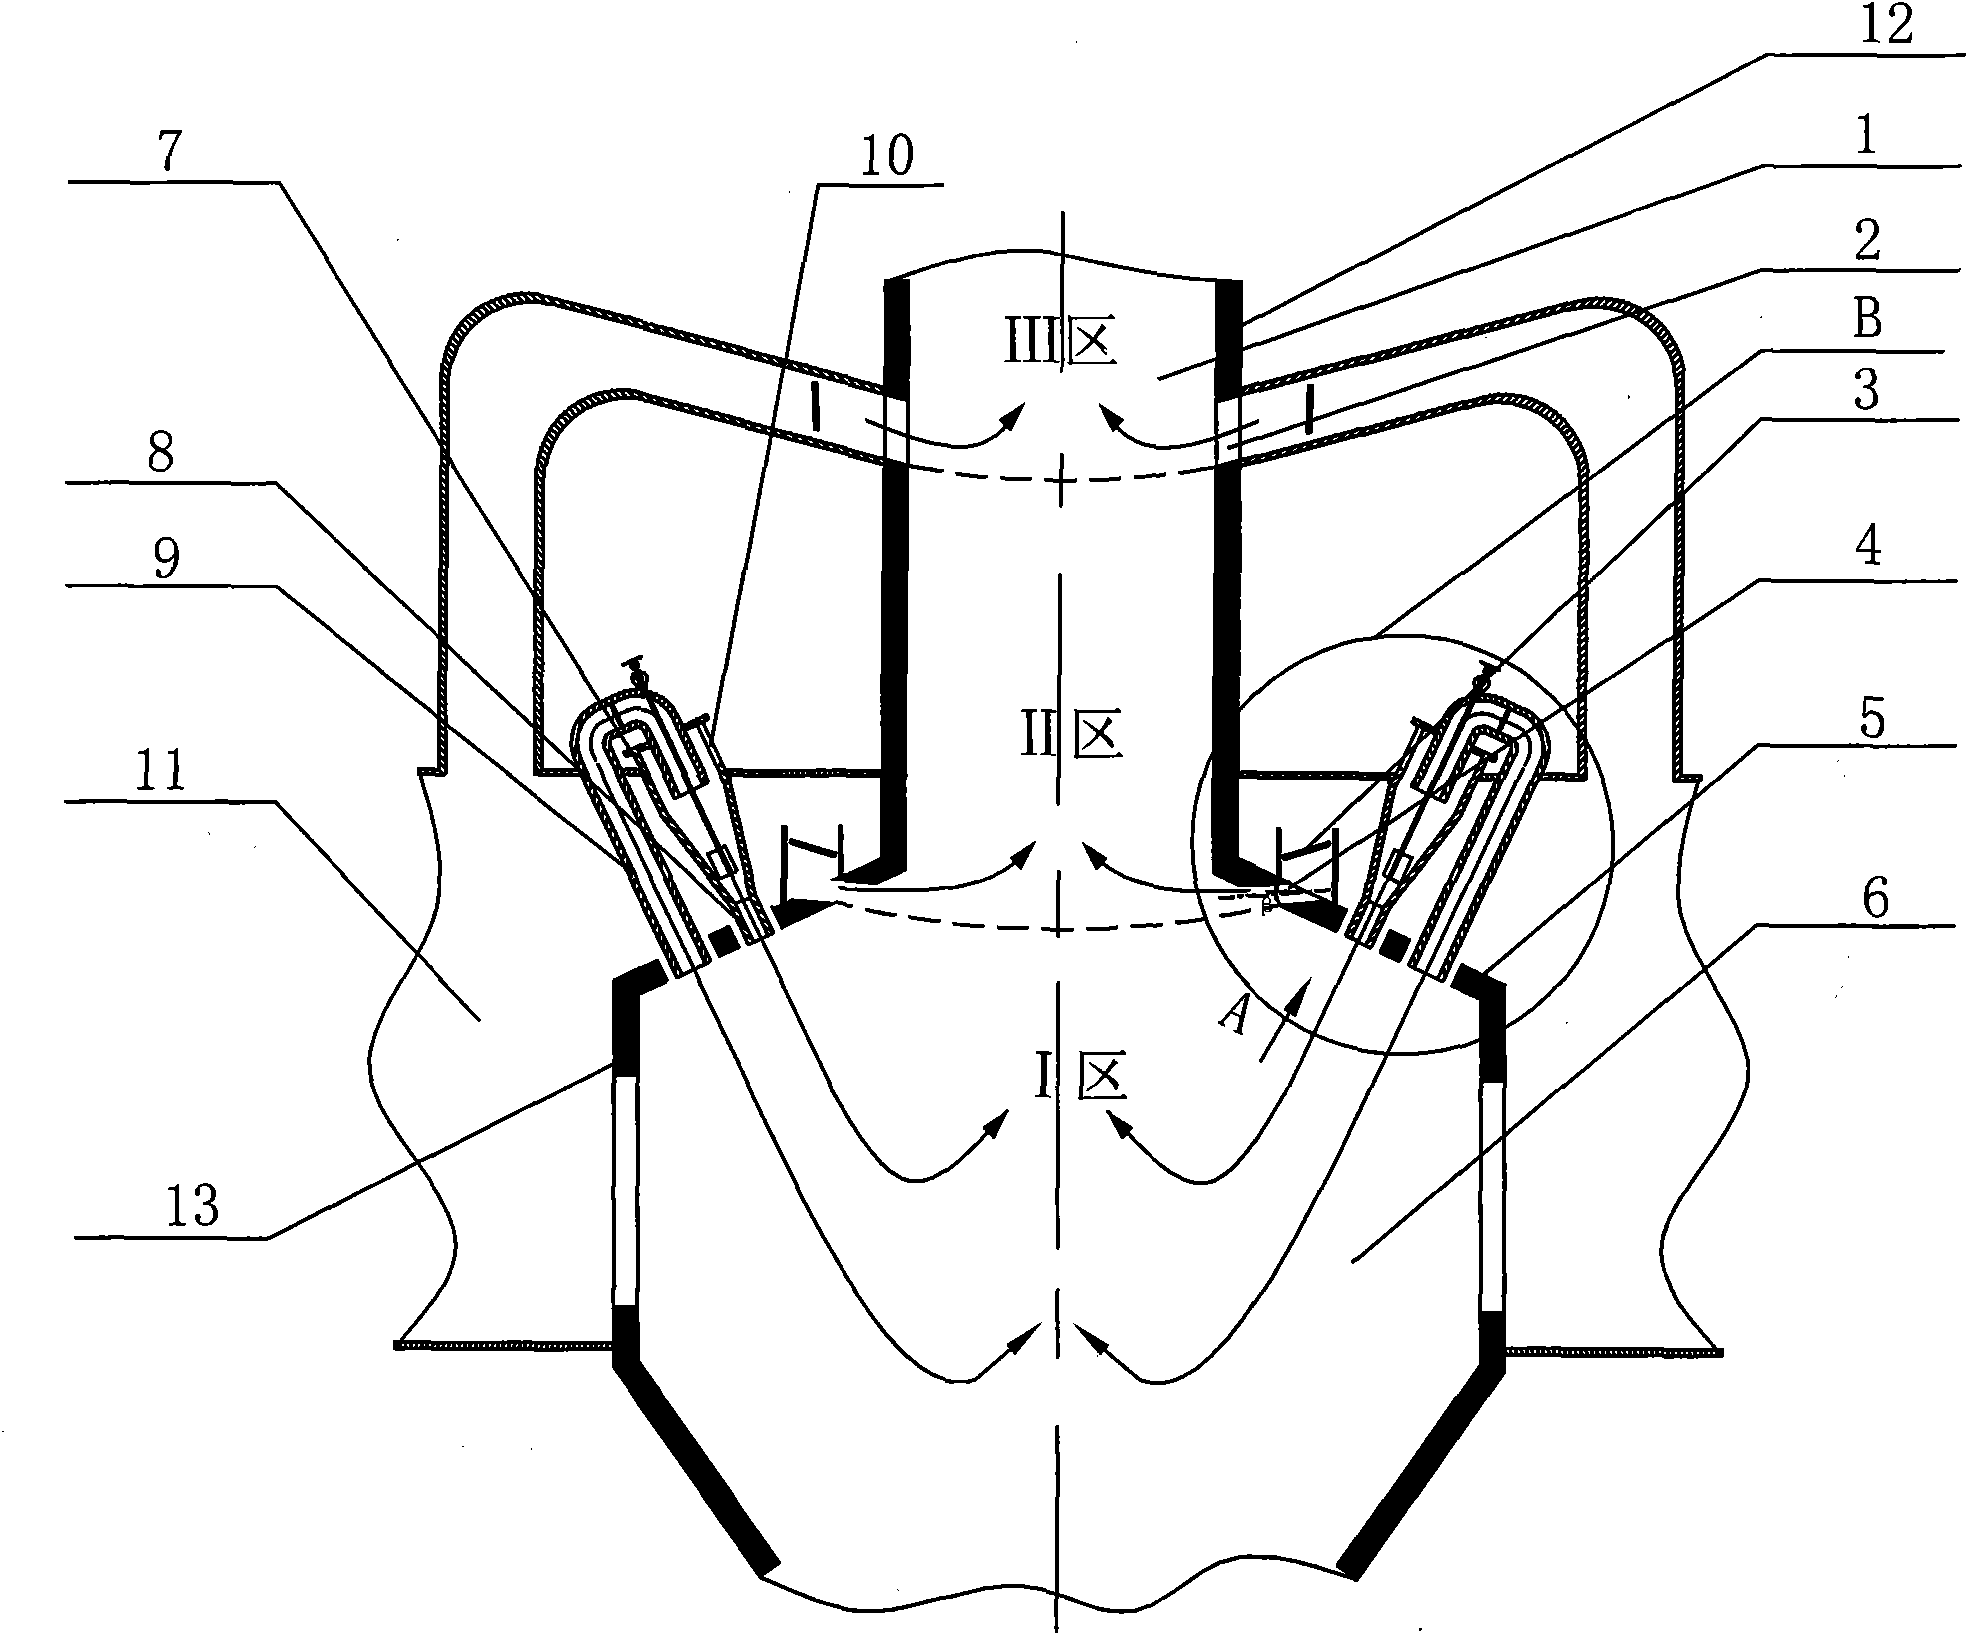 W-shaped flame boiler with two-stage over-fire wind